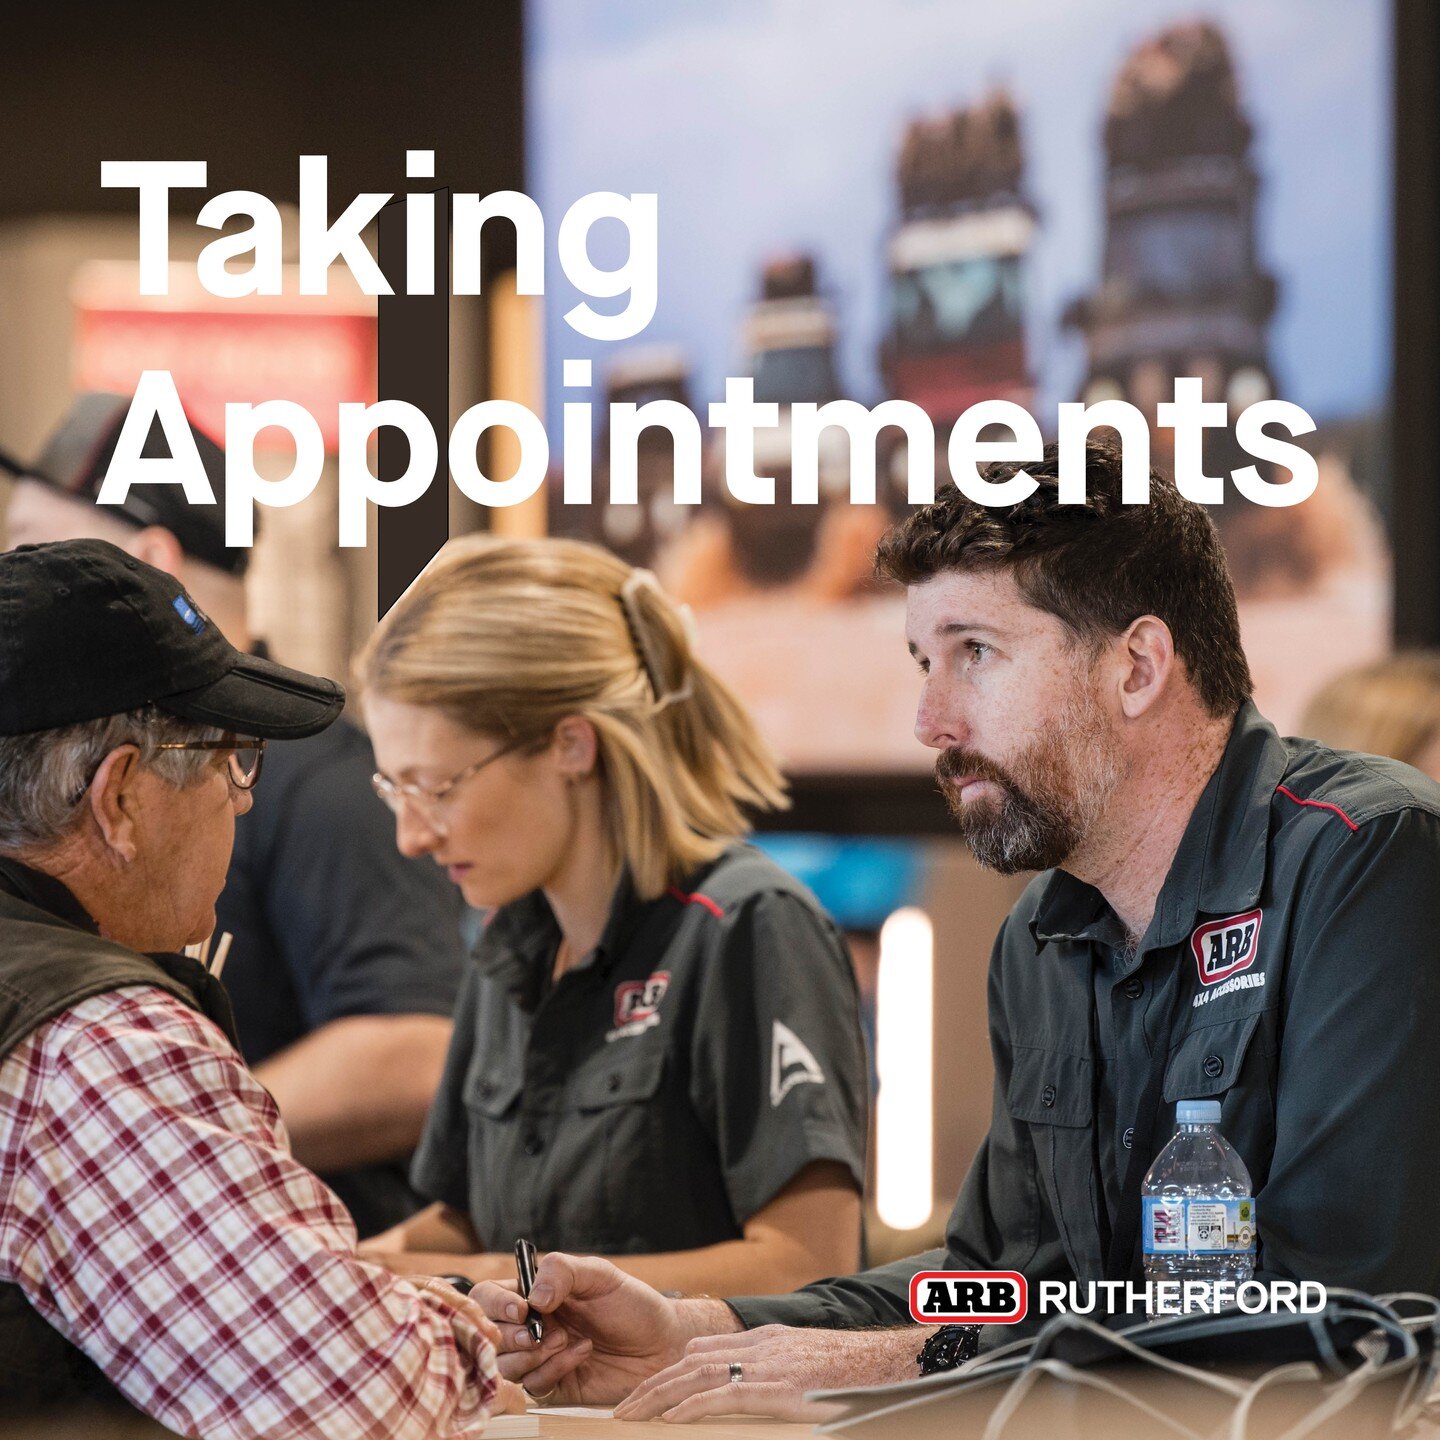 🚨WE HAVE SOME EXCITING NEWS 🚨

We are excited to share that we are now taking bookings for one-on-one appointments at ARB Rutherford.

Offering personalised sessions with our expert sales advisors, we invite you to come in, have a walk through our 